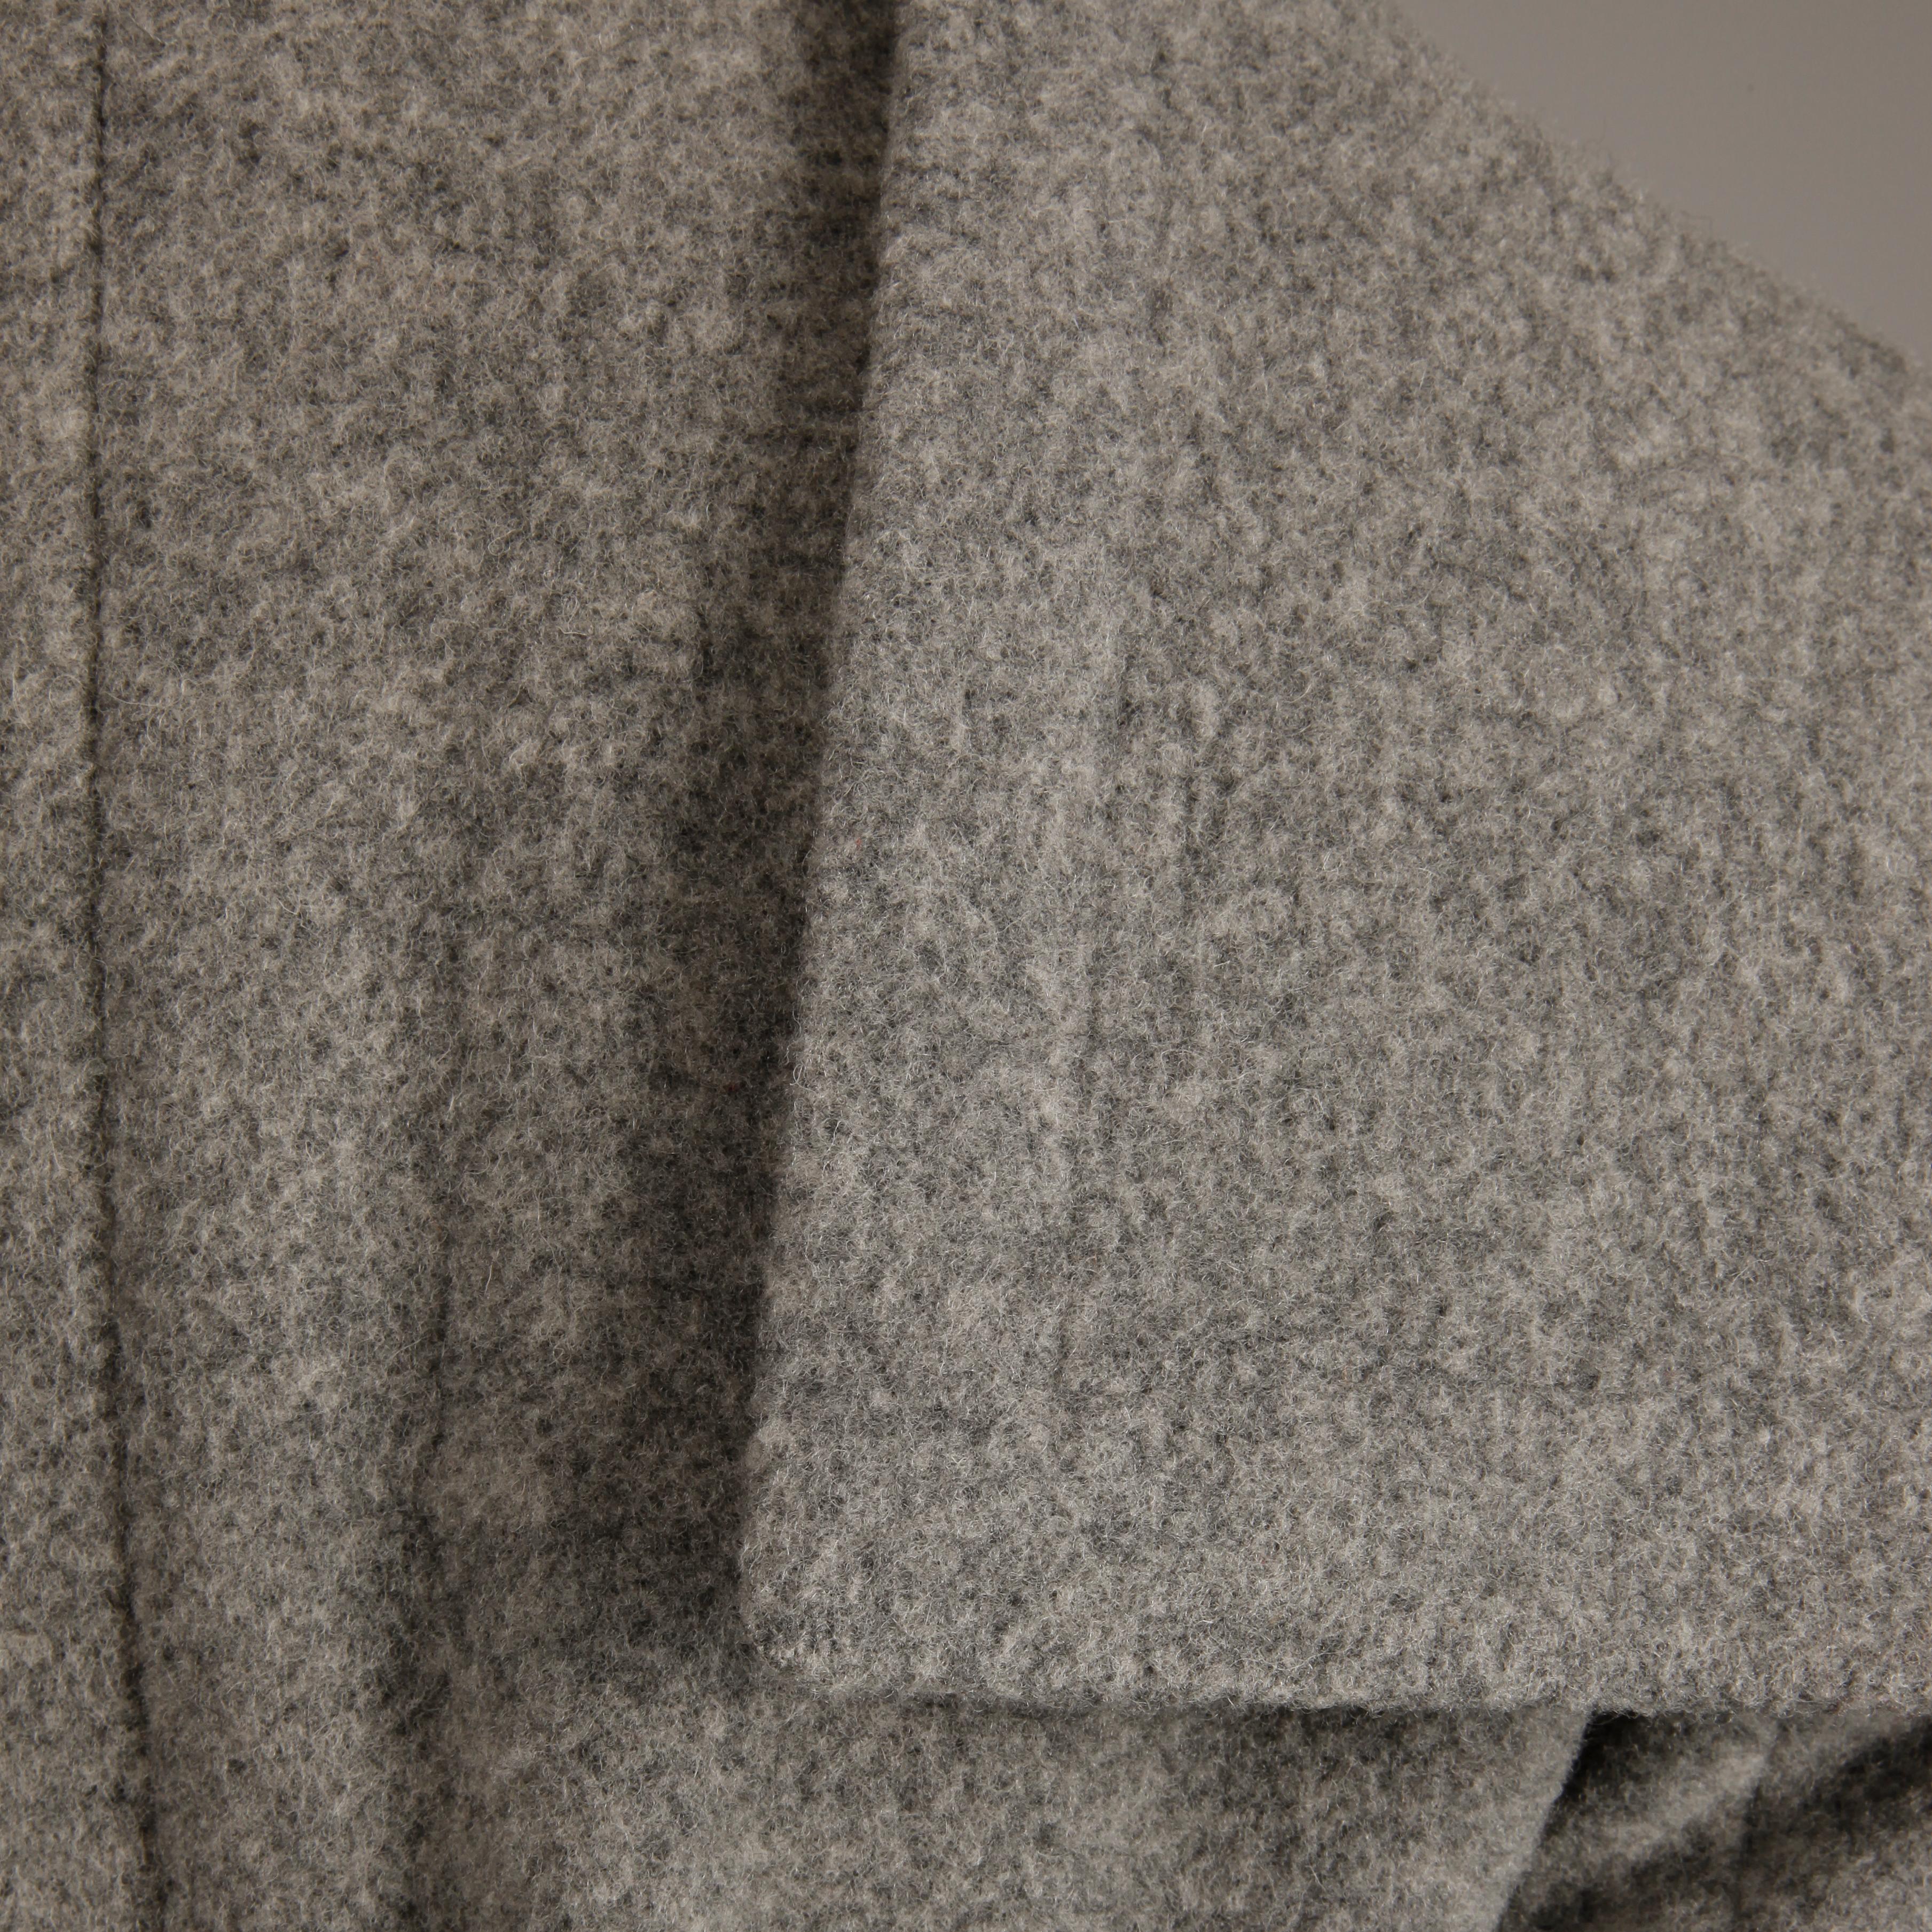 1970s Pauline Trigere Vintage Gray Wool Asymmetric Coat with Attached Scarf